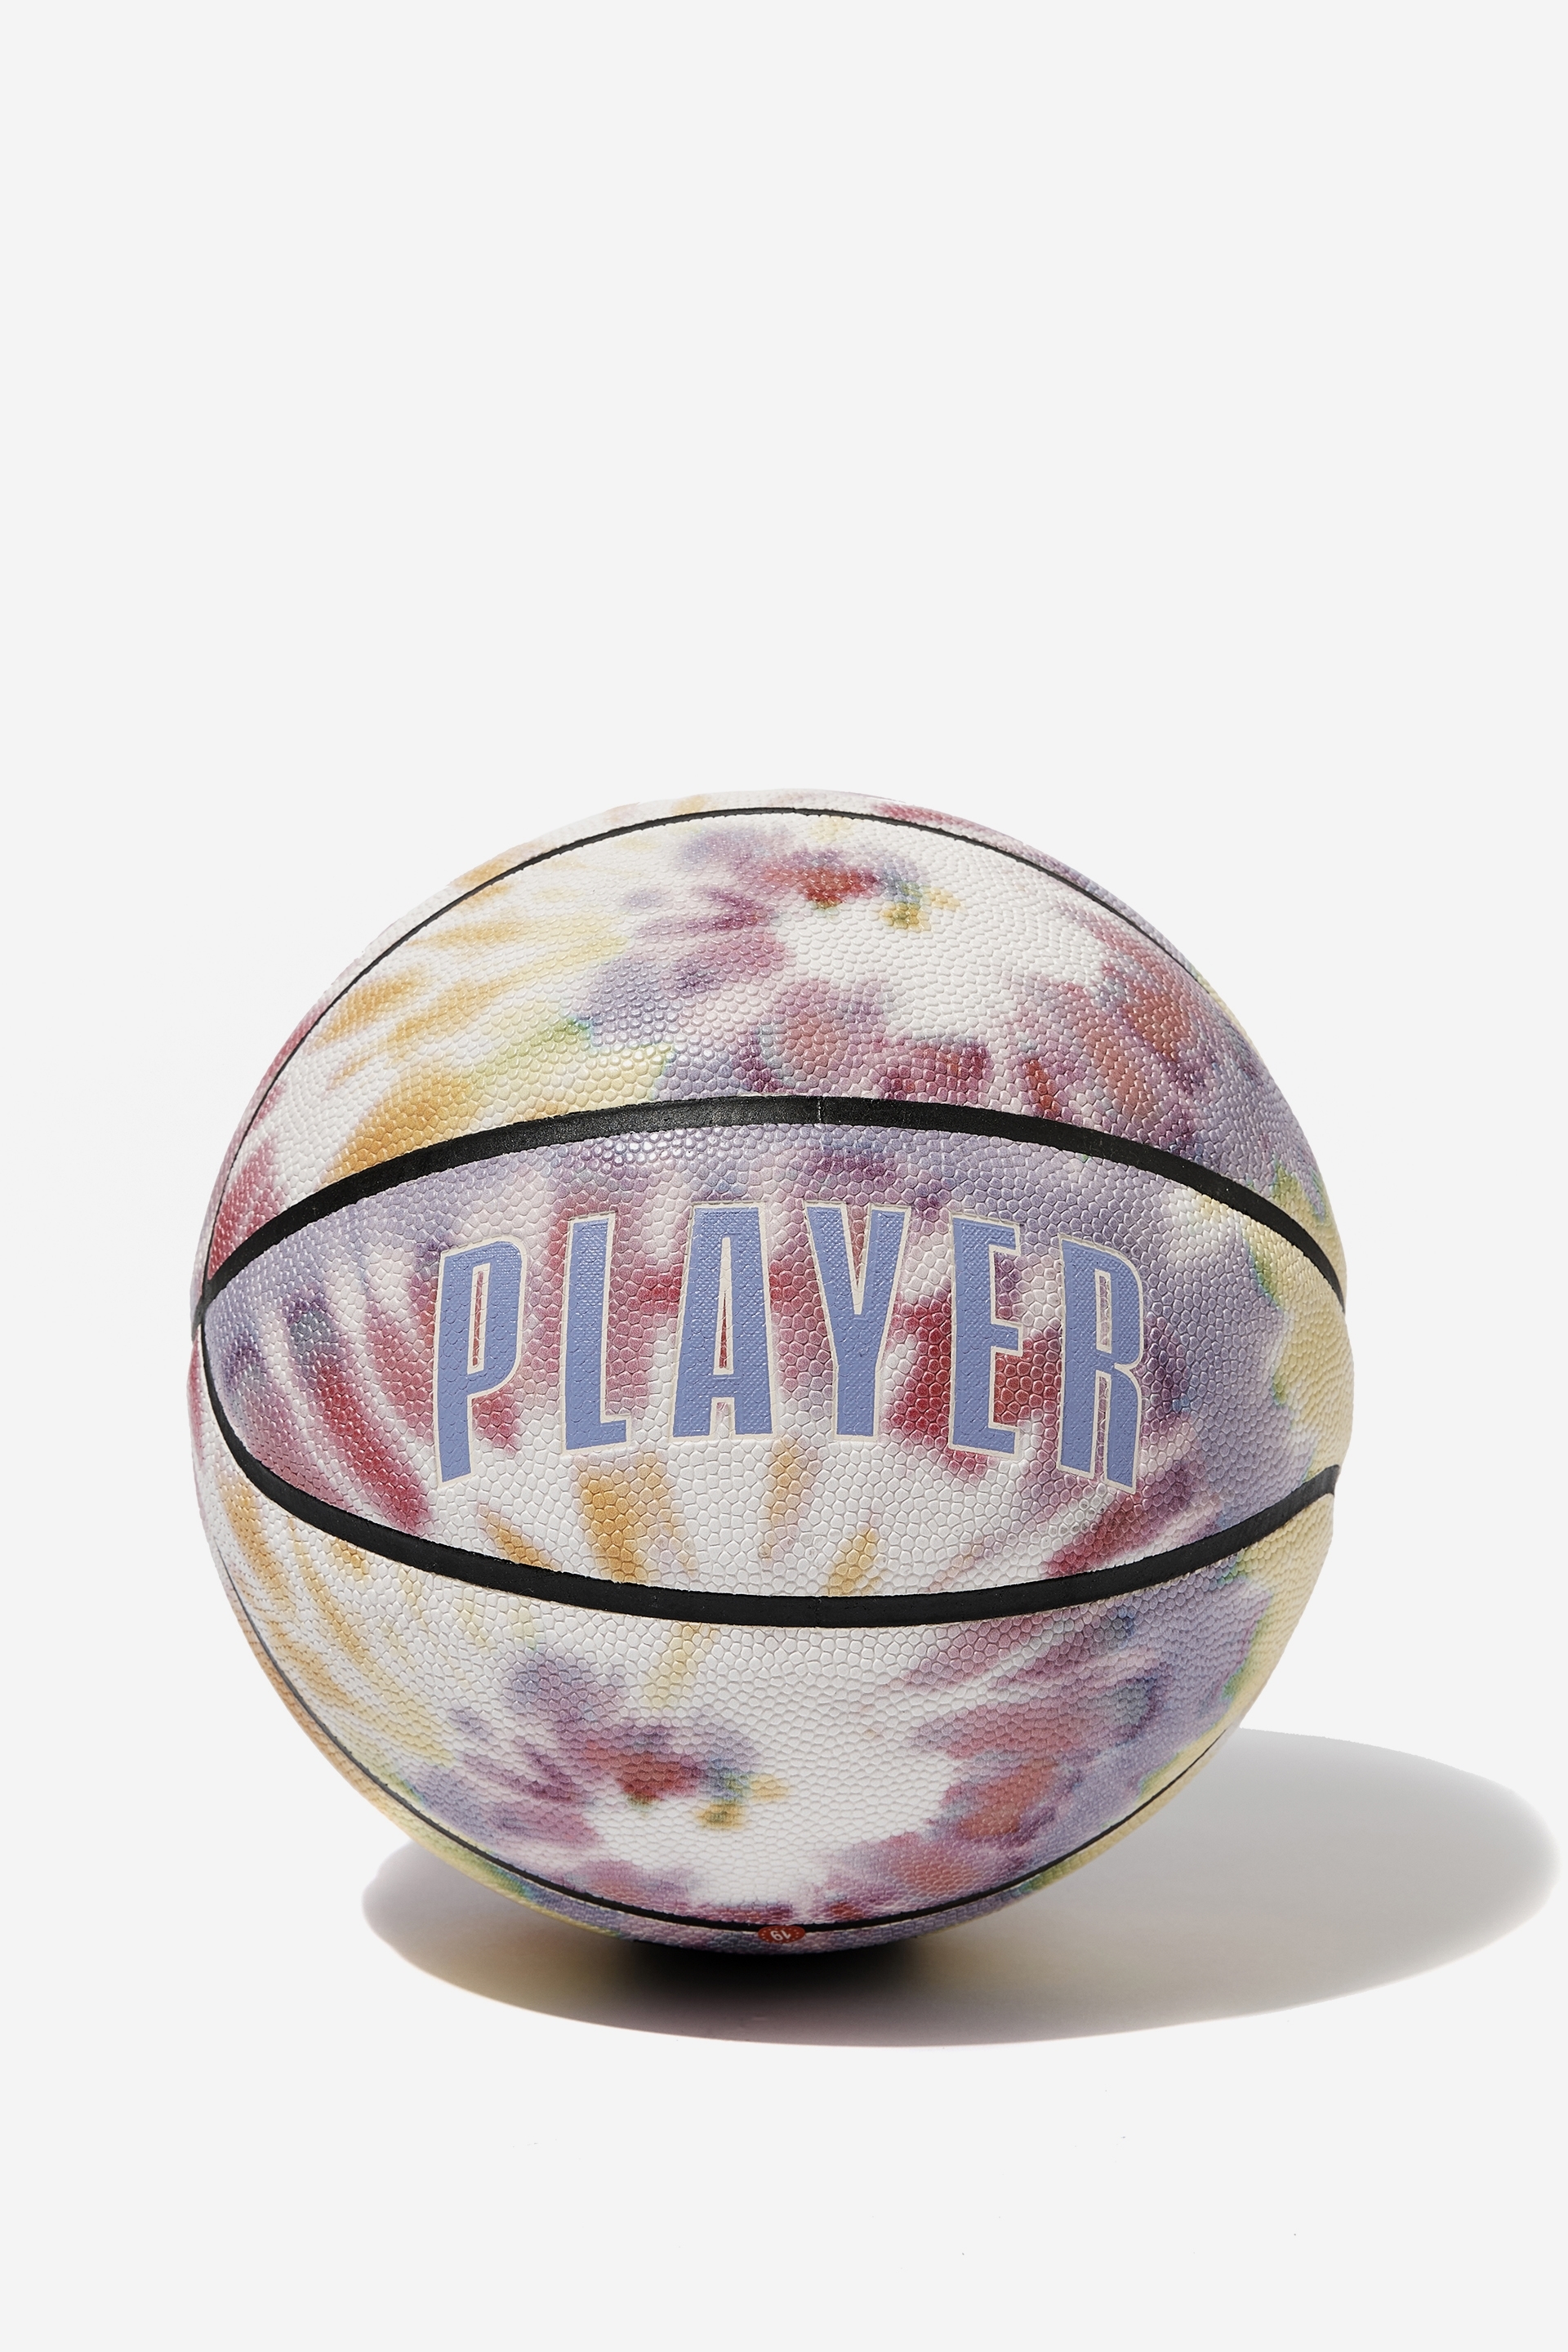 Typo - Basketball Size 7 - Player lilac